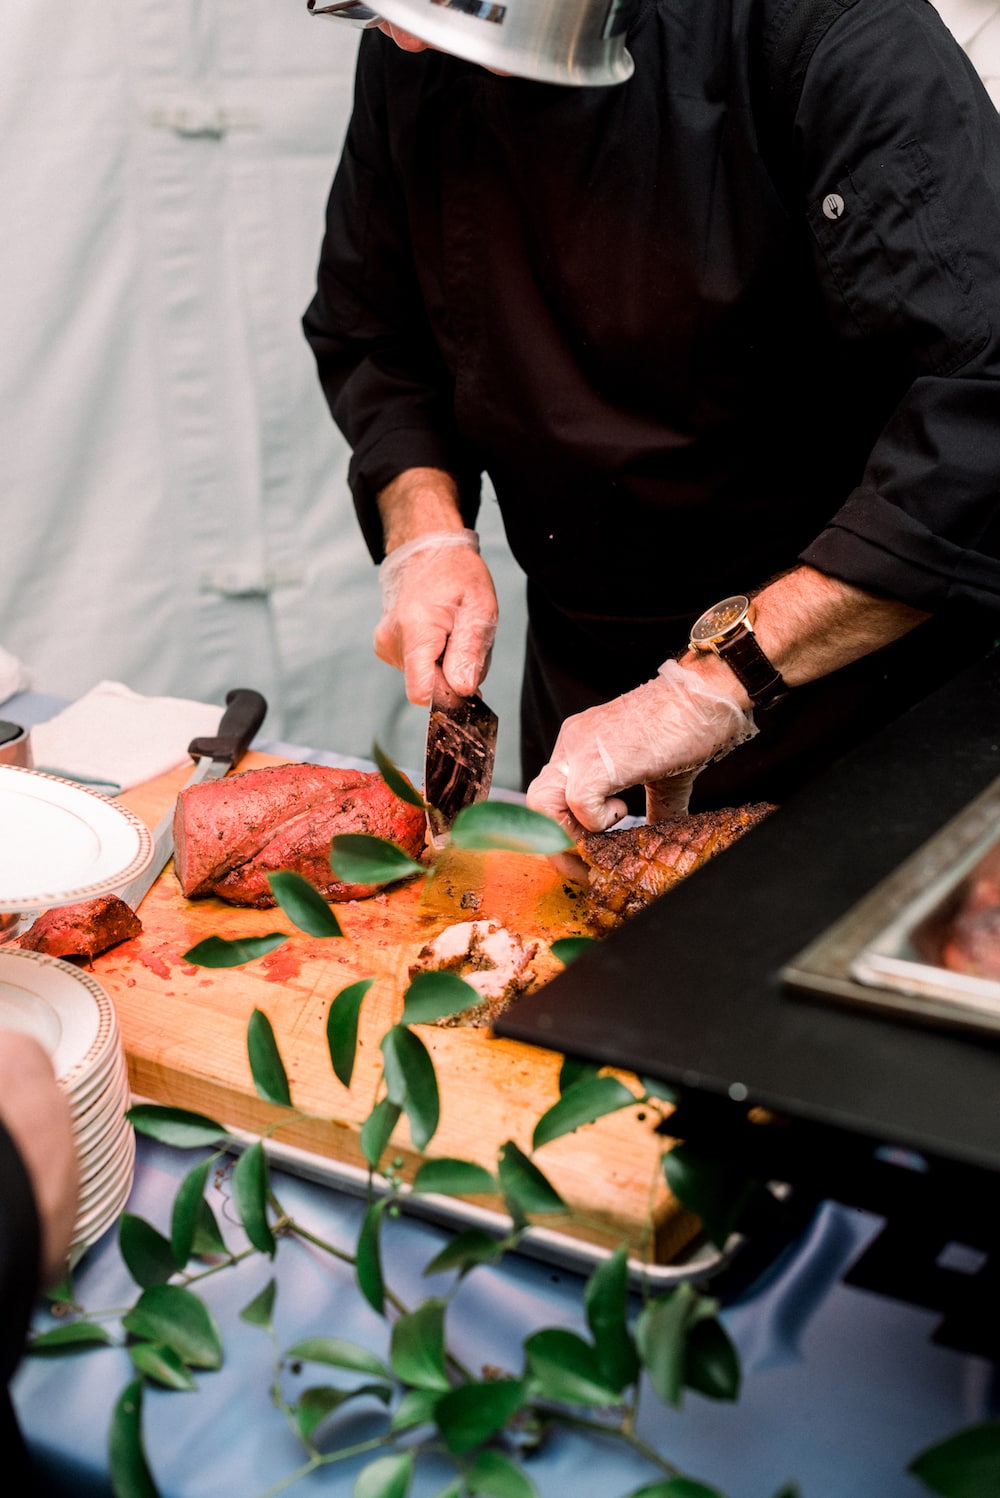 A Guide for Planning a Fairmont Copley Plaza Wedding in Boston: Close-up shot of vendor cutting up meat slices at the reception.